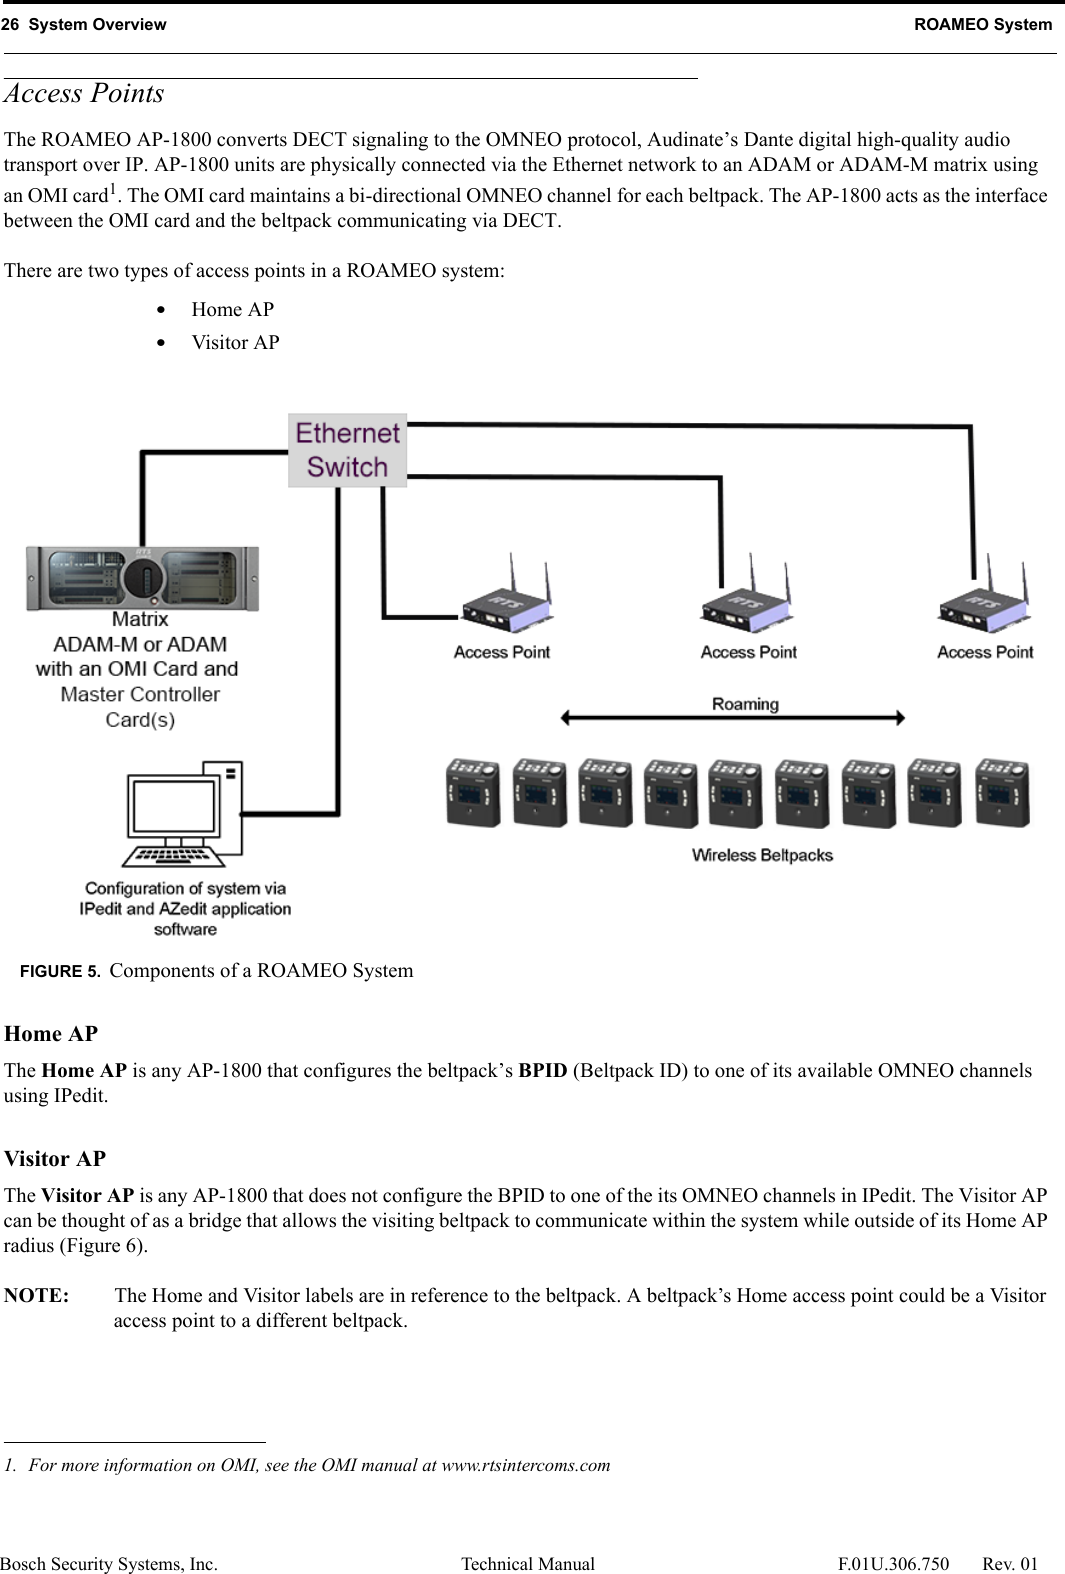 26  System Overview ROAMEO SystemBosch Security Systems, Inc. Technical Manual  F.01U.306.750 Rev. 01Access PointsThe ROAMEO AP-1800 converts DECT signaling to the OMNEO protocol, Audinate’s Dante digital high-quality audio transport over IP. AP-1800 units are physically connected via the Ethernet network to an ADAM or ADAM-M matrix using an OMI card1. The OMI card maintains a bi-directional OMNEO channel for each beltpack. The AP-1800 acts as the interface between the OMI card and the beltpack communicating via DECT.There are two types of access points in a ROAMEO system:•Home AP•Visitor APHome APThe Home AP is any AP-1800 that configures the beltpack’s BPID (Beltpack ID) to one of its available OMNEO channels using IPedit.Visitor APThe Visitor AP is any AP-1800 that does not configure the BPID to one of the its OMNEO channels in IPedit. The Visitor AP can be thought of as a bridge that allows the visiting beltpack to communicate within the system while outside of its Home AP radius (Figure 6).NOTE: The Home and Visitor labels are in reference to the beltpack. A beltpack’s Home access point could be a Visitor access point to a different beltpack.1. For more information on OMI, see the OMI manual at www.rtsintercoms.comFIGURE 5. Components of a ROAMEO System